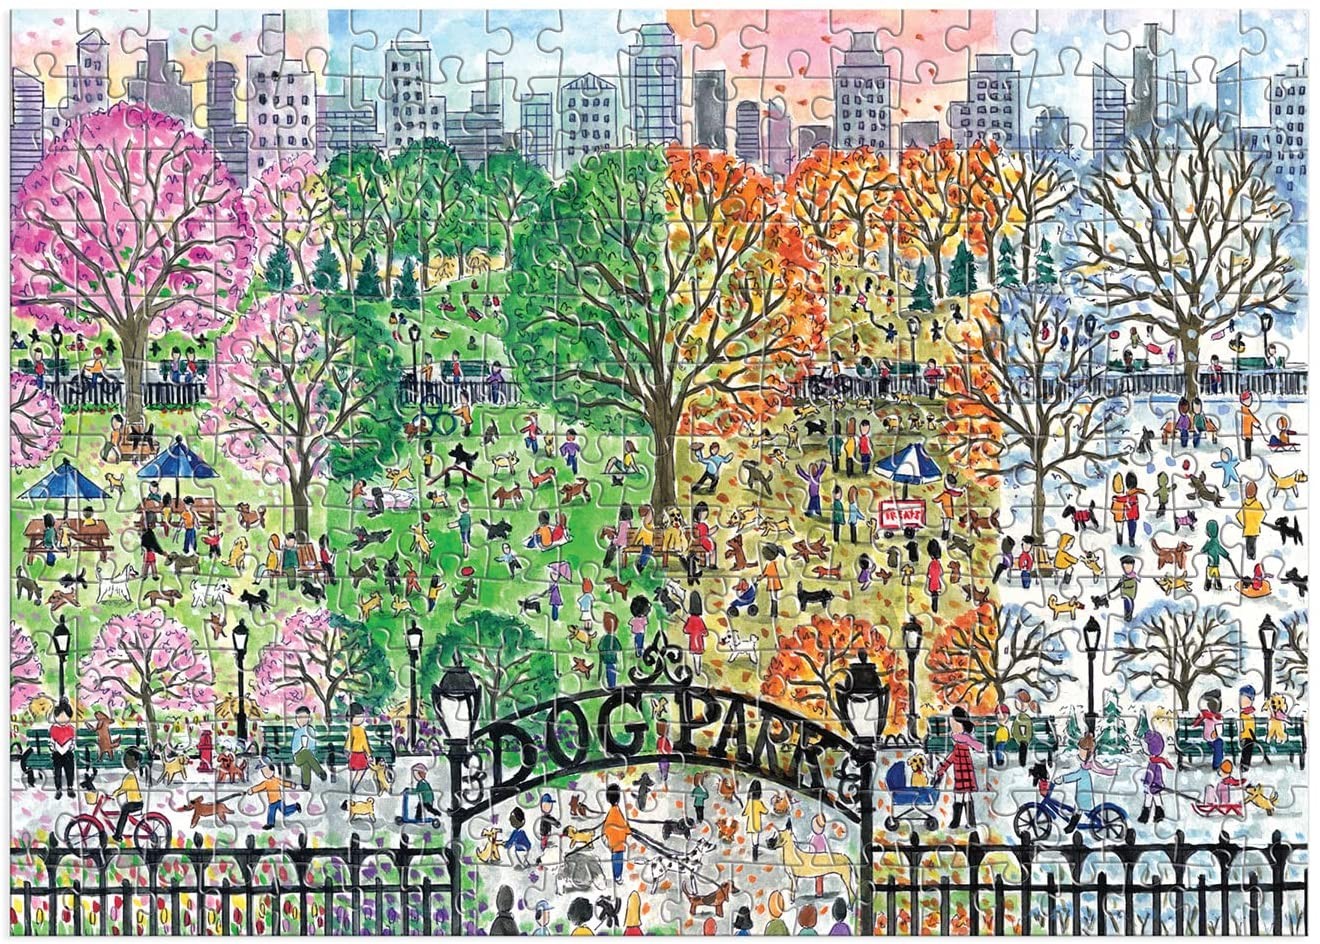 Dog Park in Four Seasons by Michael Storrings 1000 Piece Jigsaw Puzzle